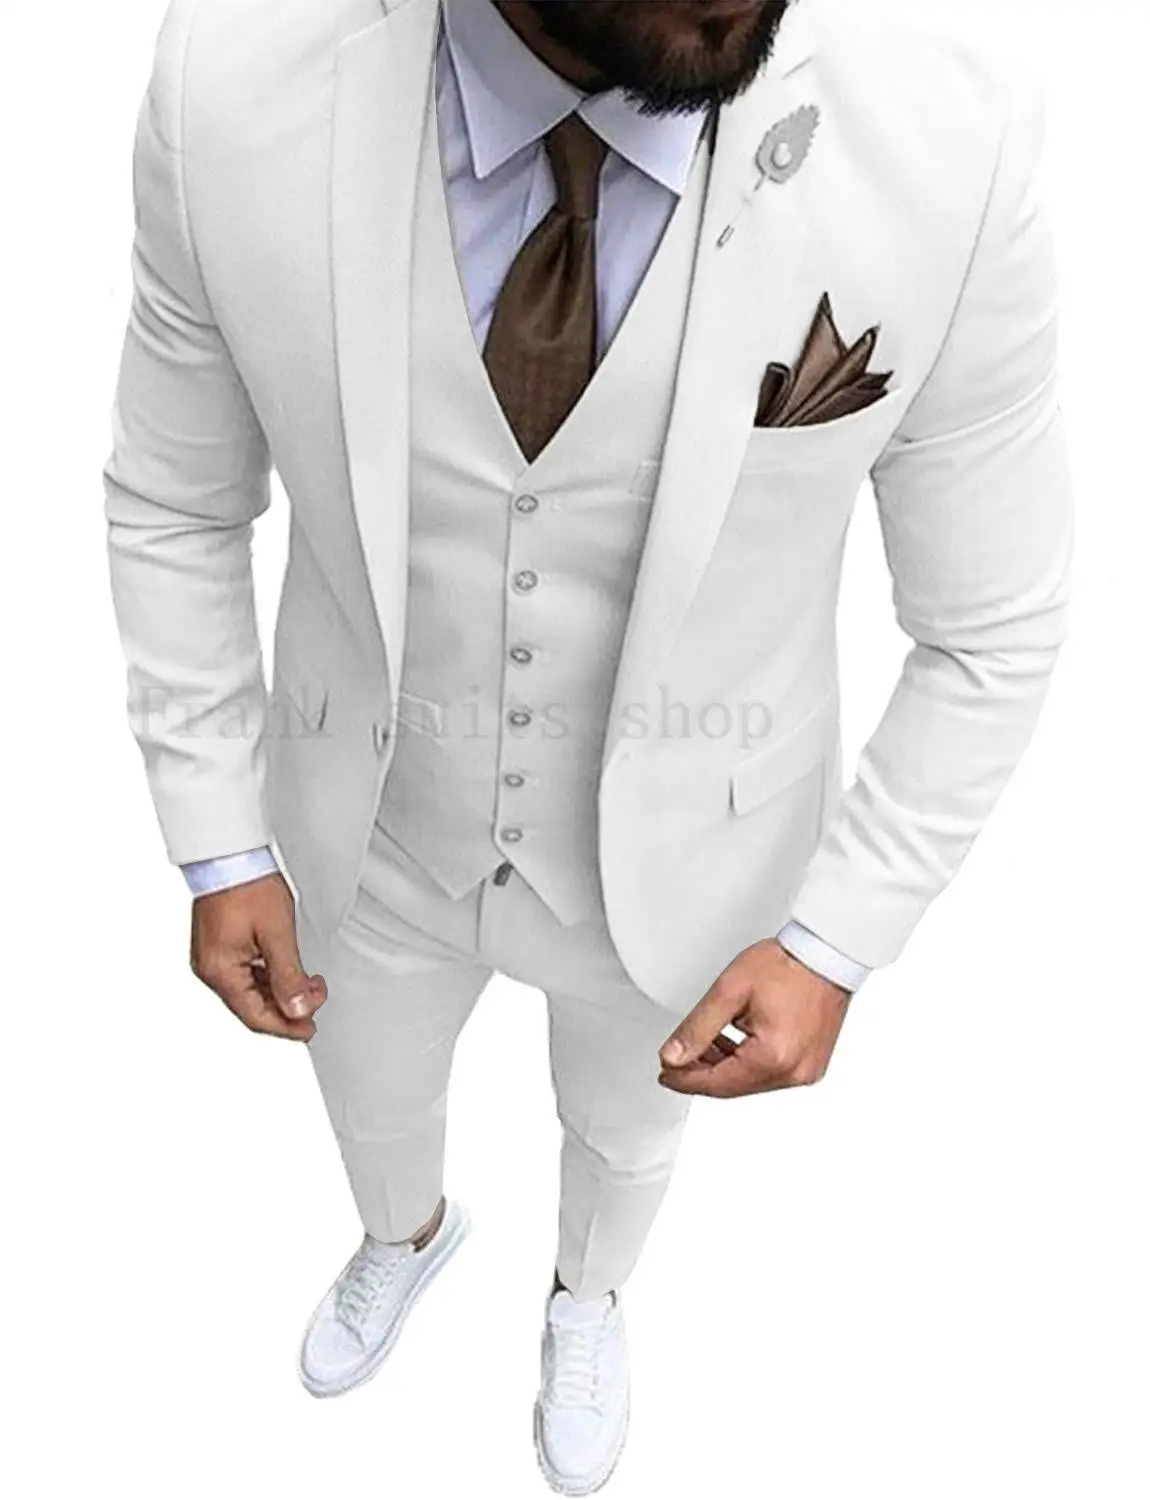 2019 White Party Suit Men Groom Tuxedos Costme Homme Terno Blazer Notch Lapel Two Buttons Men Wedding Suits 3 Pieces